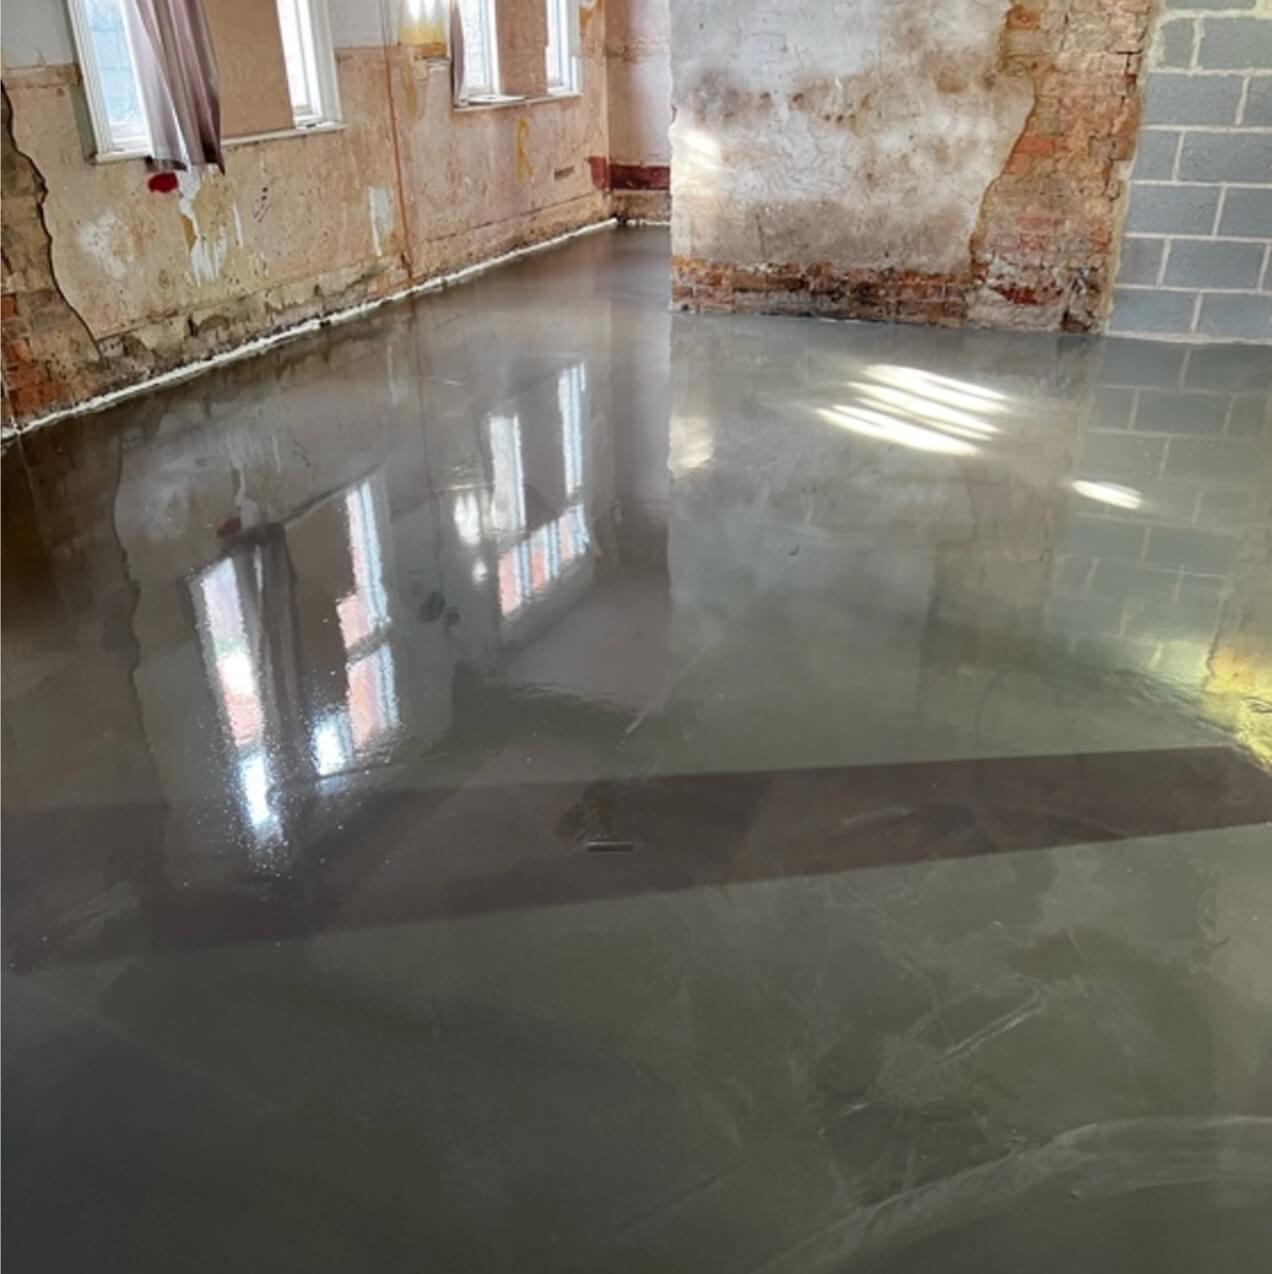 Self leveling compund being installed throughout a pub renovation, in some areas it reaches depths of 50mm to gain the correct levels